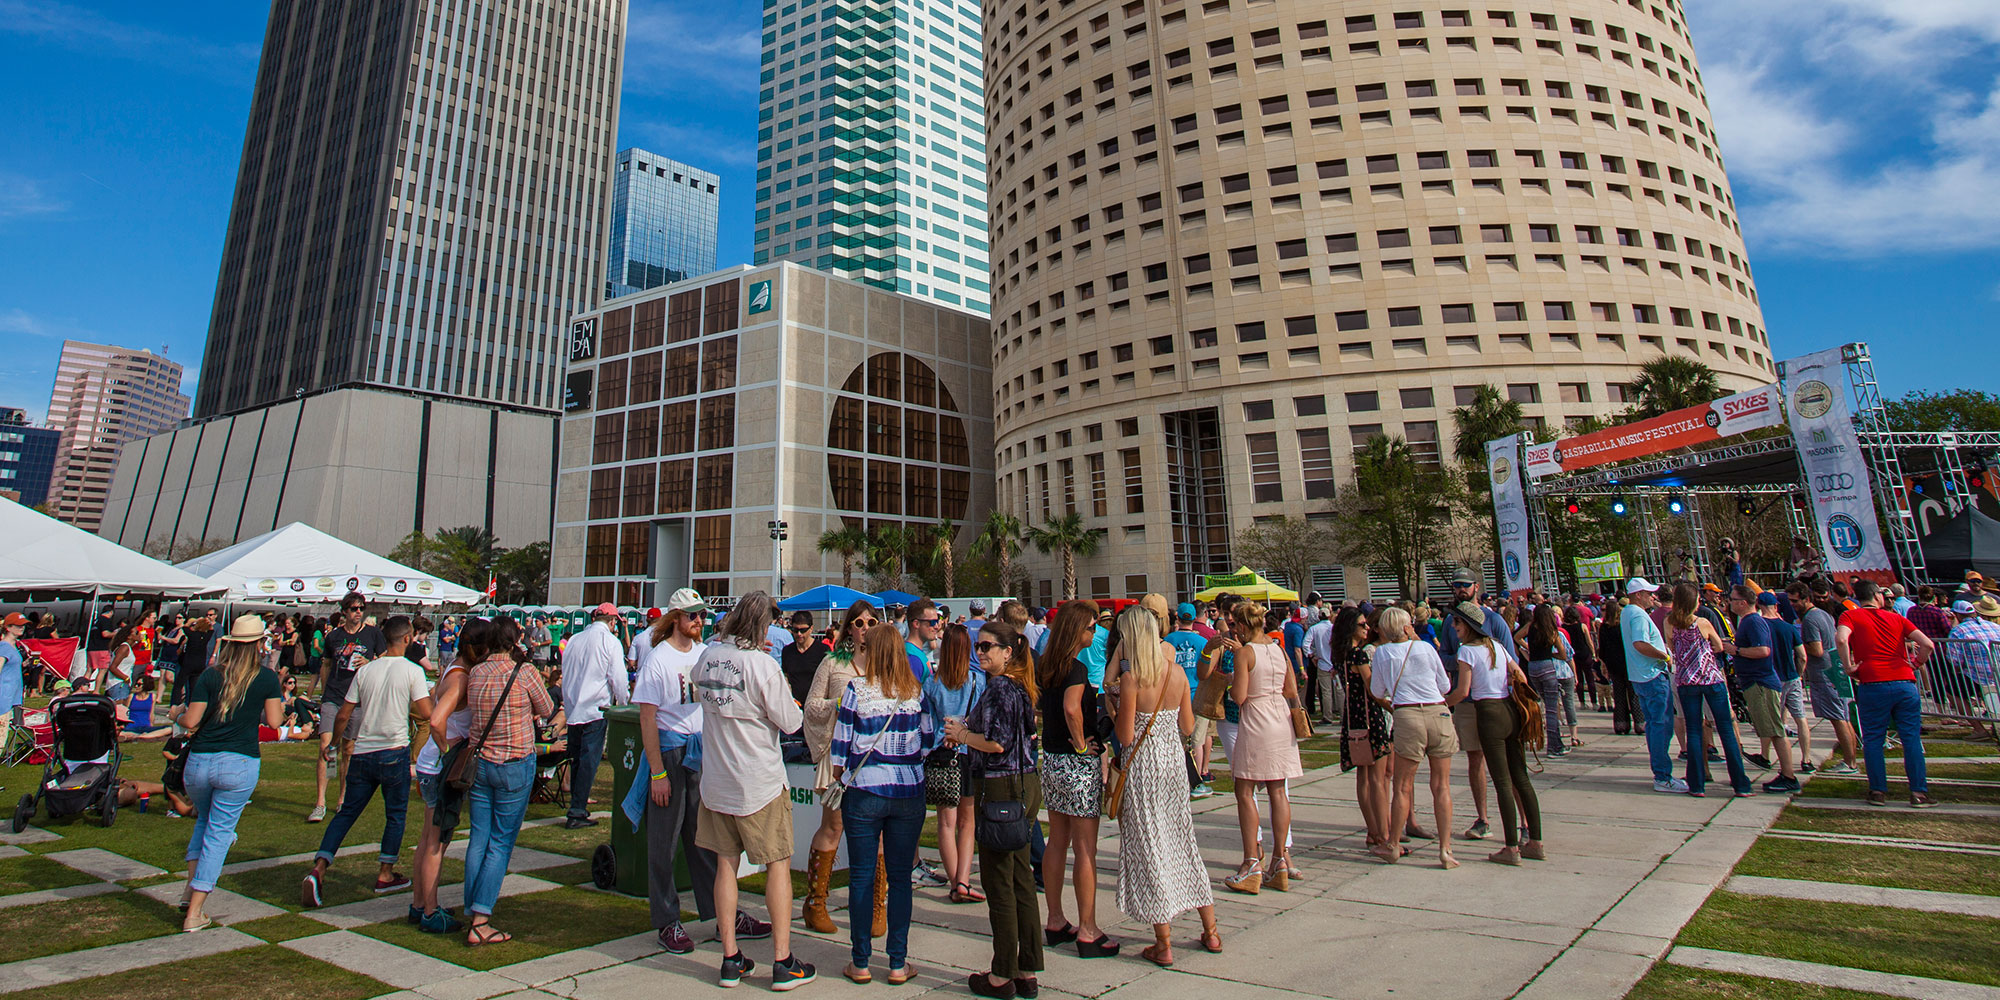 People enjoy live music events on the lawn of Curtis Hixon Waterfront Park in downtown Tampa.